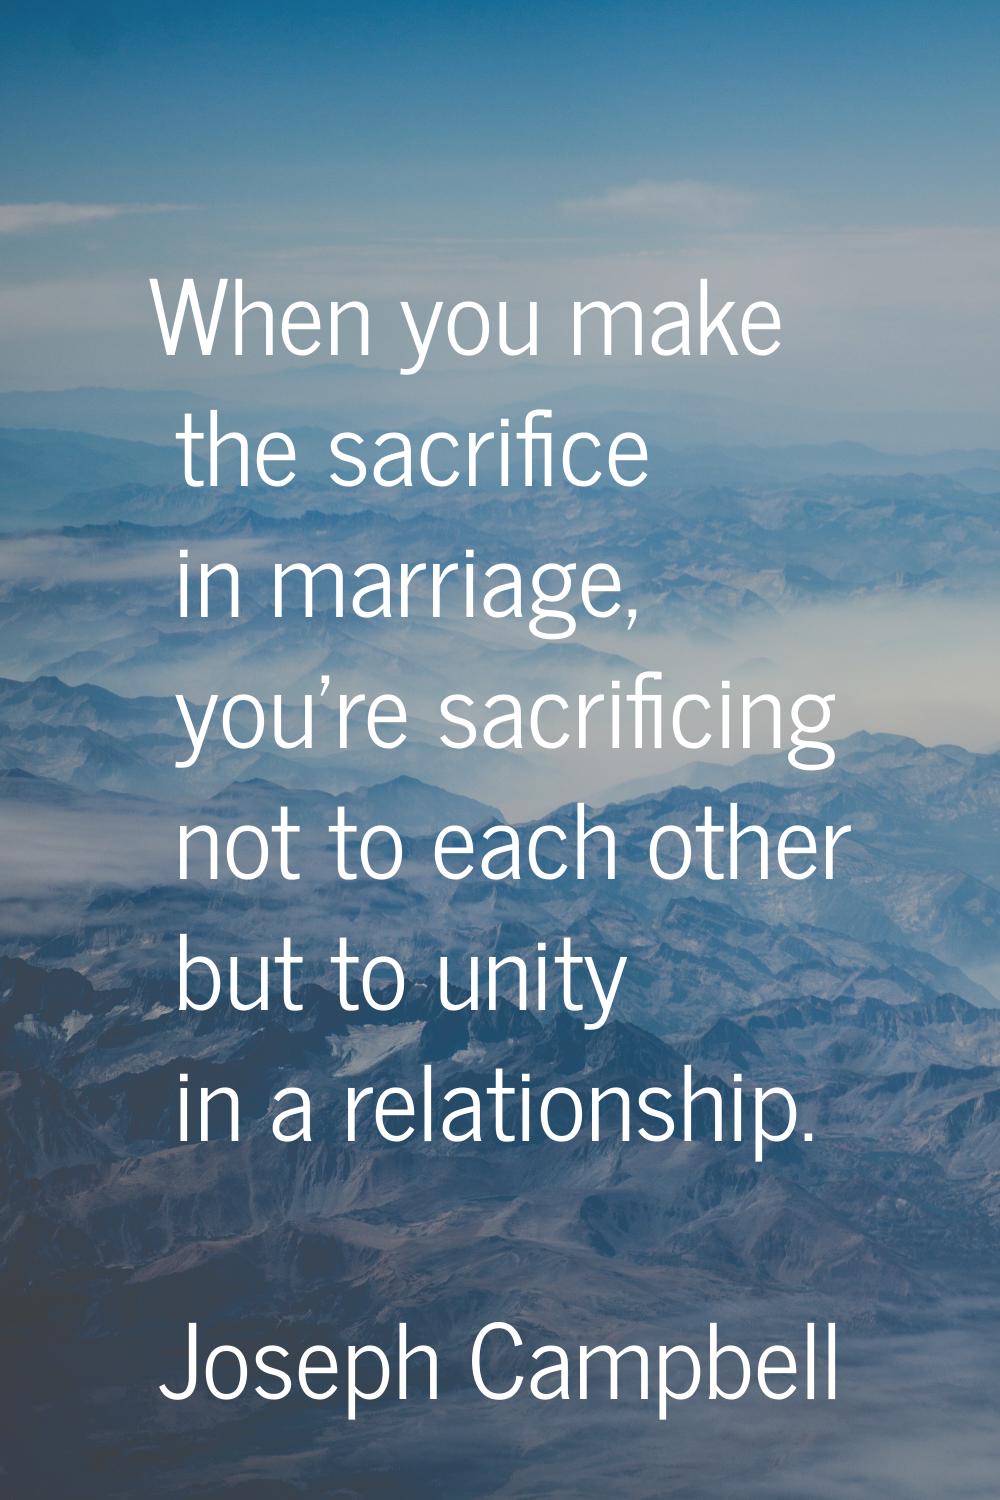 When you make the sacrifice in marriage, you're sacrificing not to each other but to unity in a rel